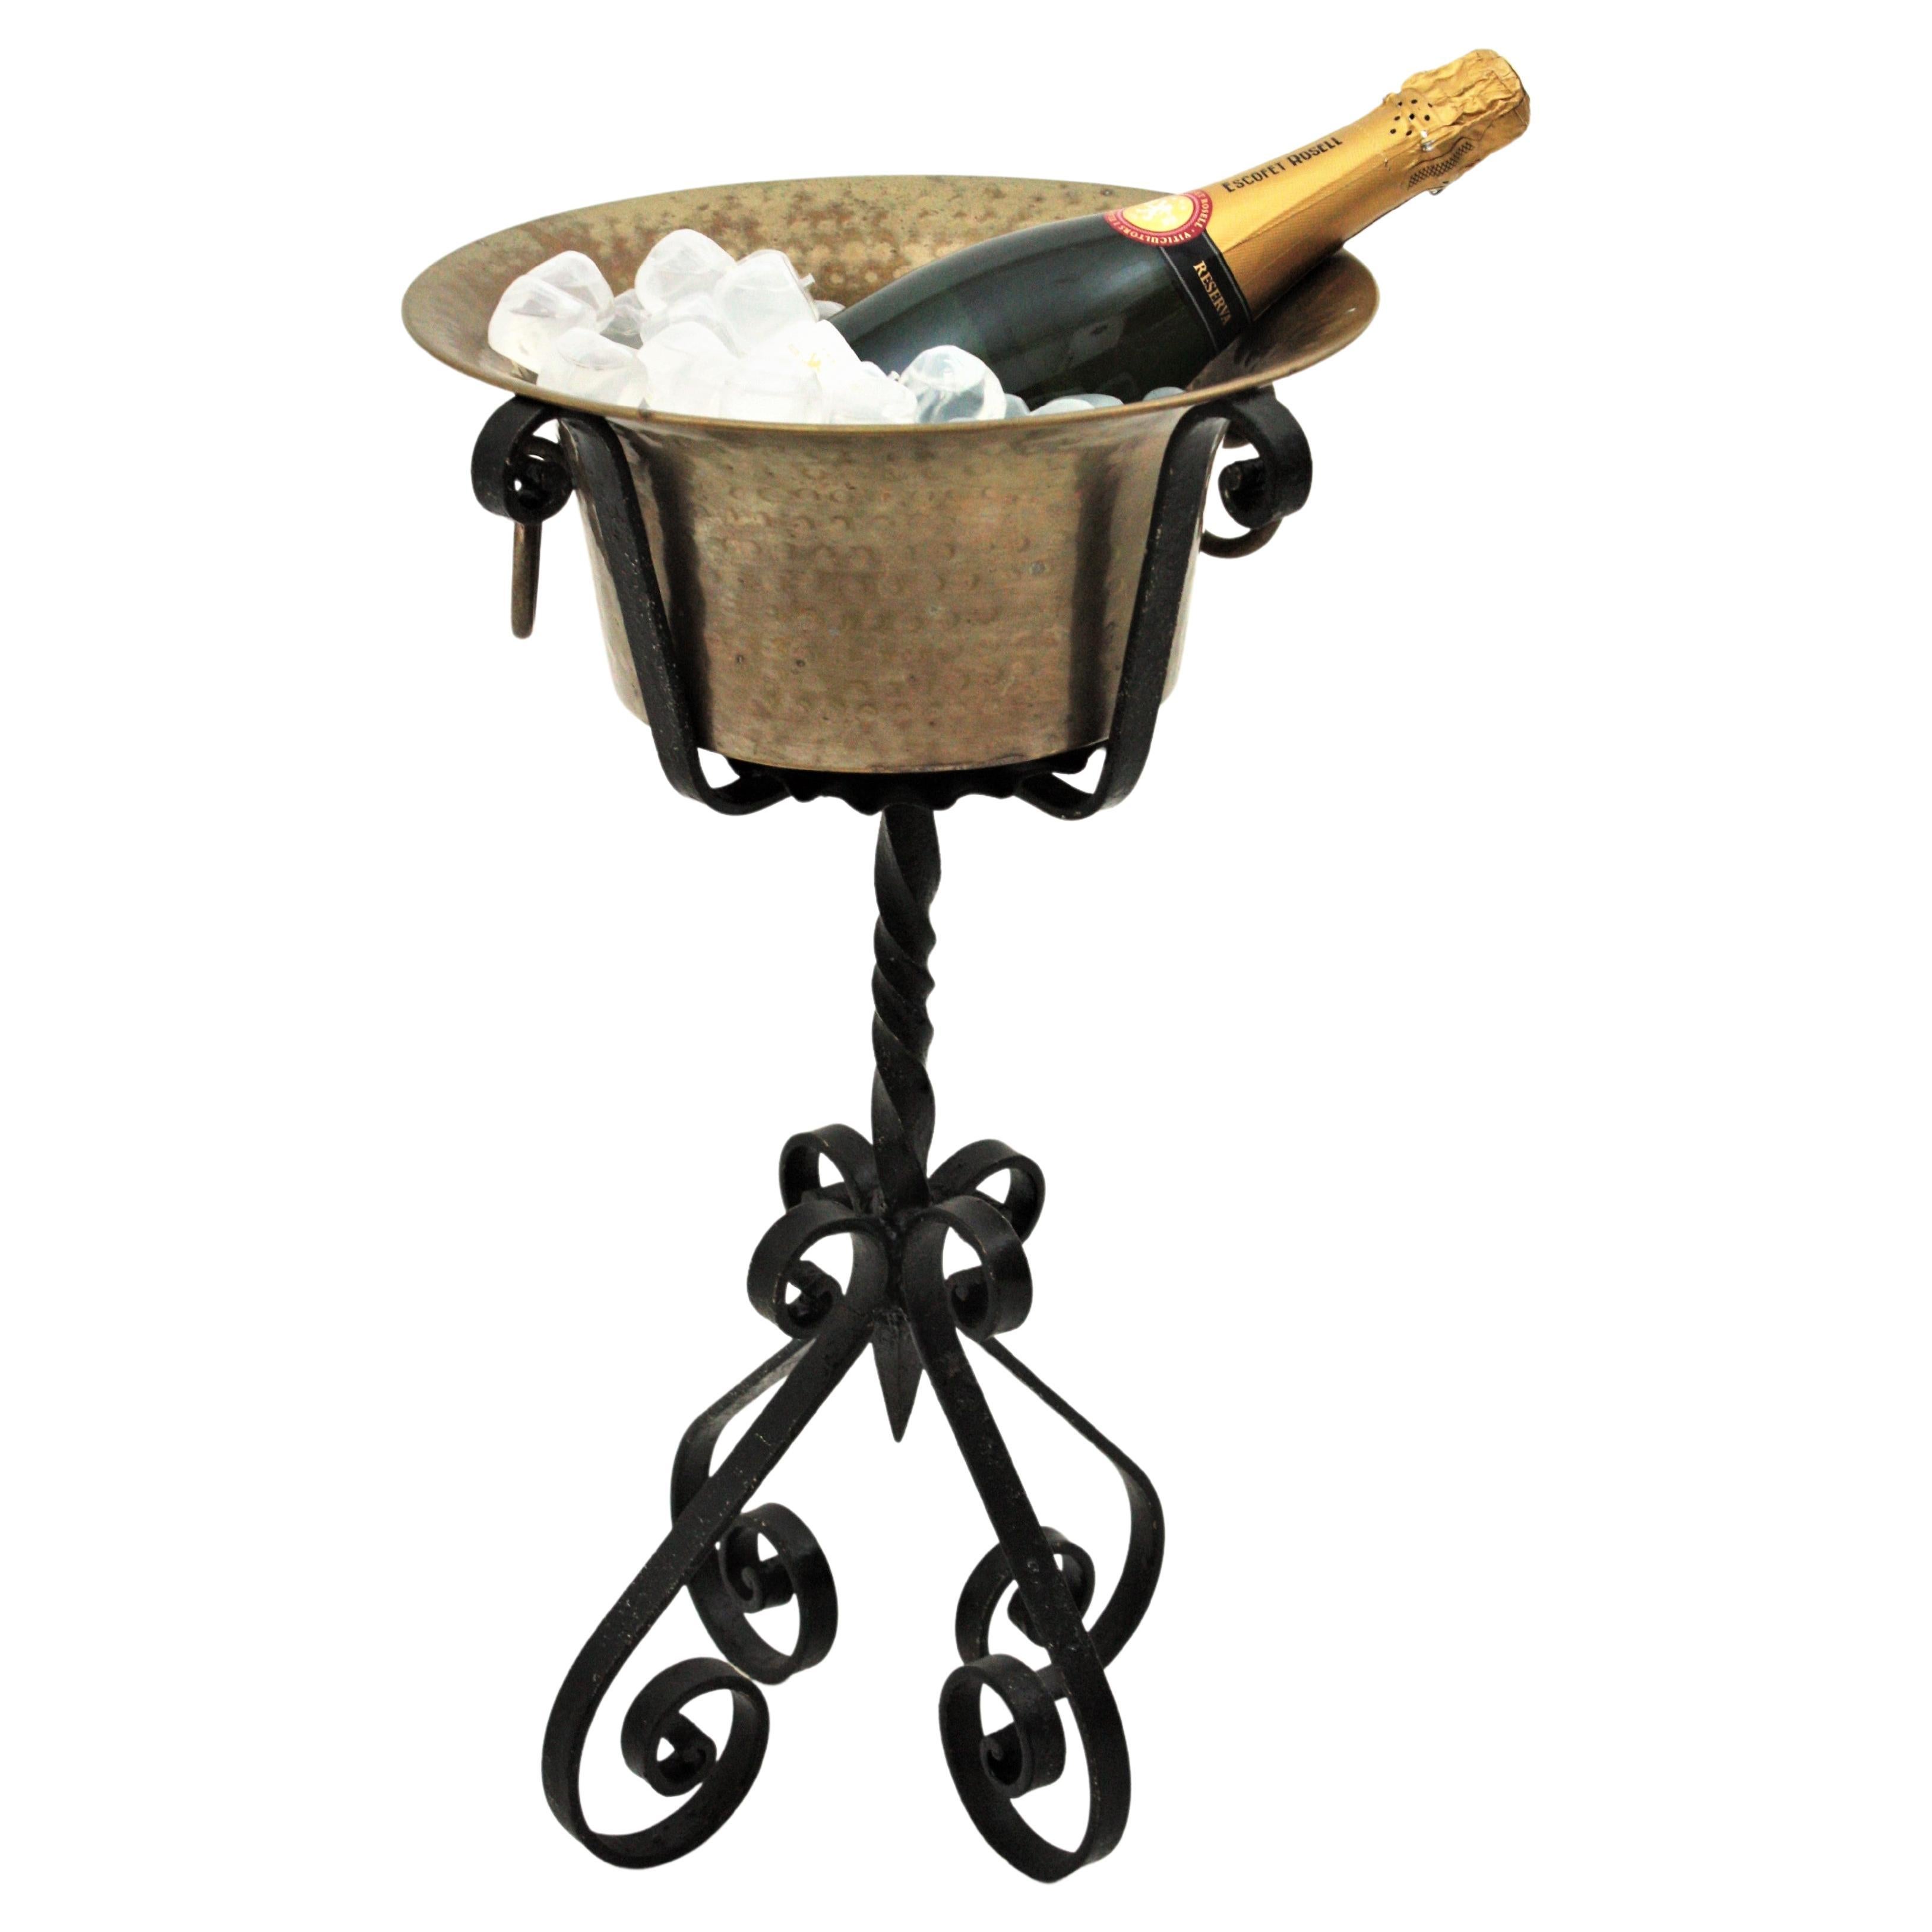 Wrought Iron and Brass Champagne Wine Cooler Standing Ice Bucket